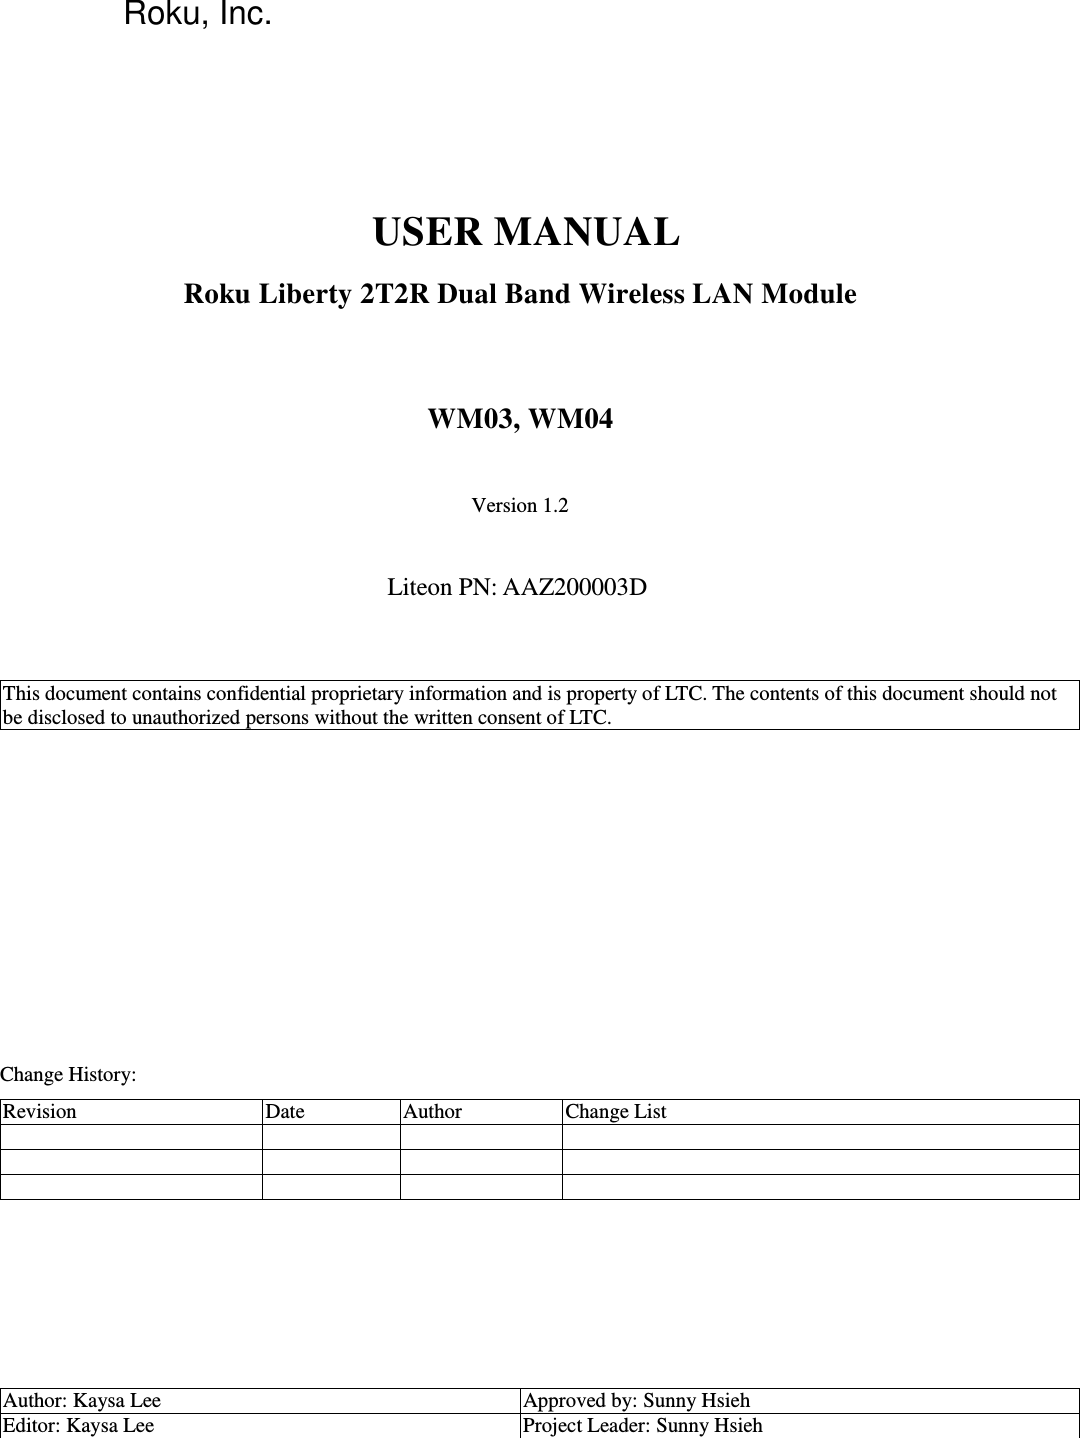 Roku, Inc.     USER MANUAL   Roku Liberty 2T2R Dual Band Wireless LAN Module  WM03, WM04  Version 1.2  Liteon PN: AAZ200003D   This document contains confidential proprietary information and is property of LTC. The contents of this document should not be disclosed to unauthorized persons without the written consent of LTC.               Change History: Revision Date Author Change List                  Author: Kaysa Lee Approved by: Sunny Hsieh Editor: Kaysa Lee Project Leader: Sunny Hsieh   